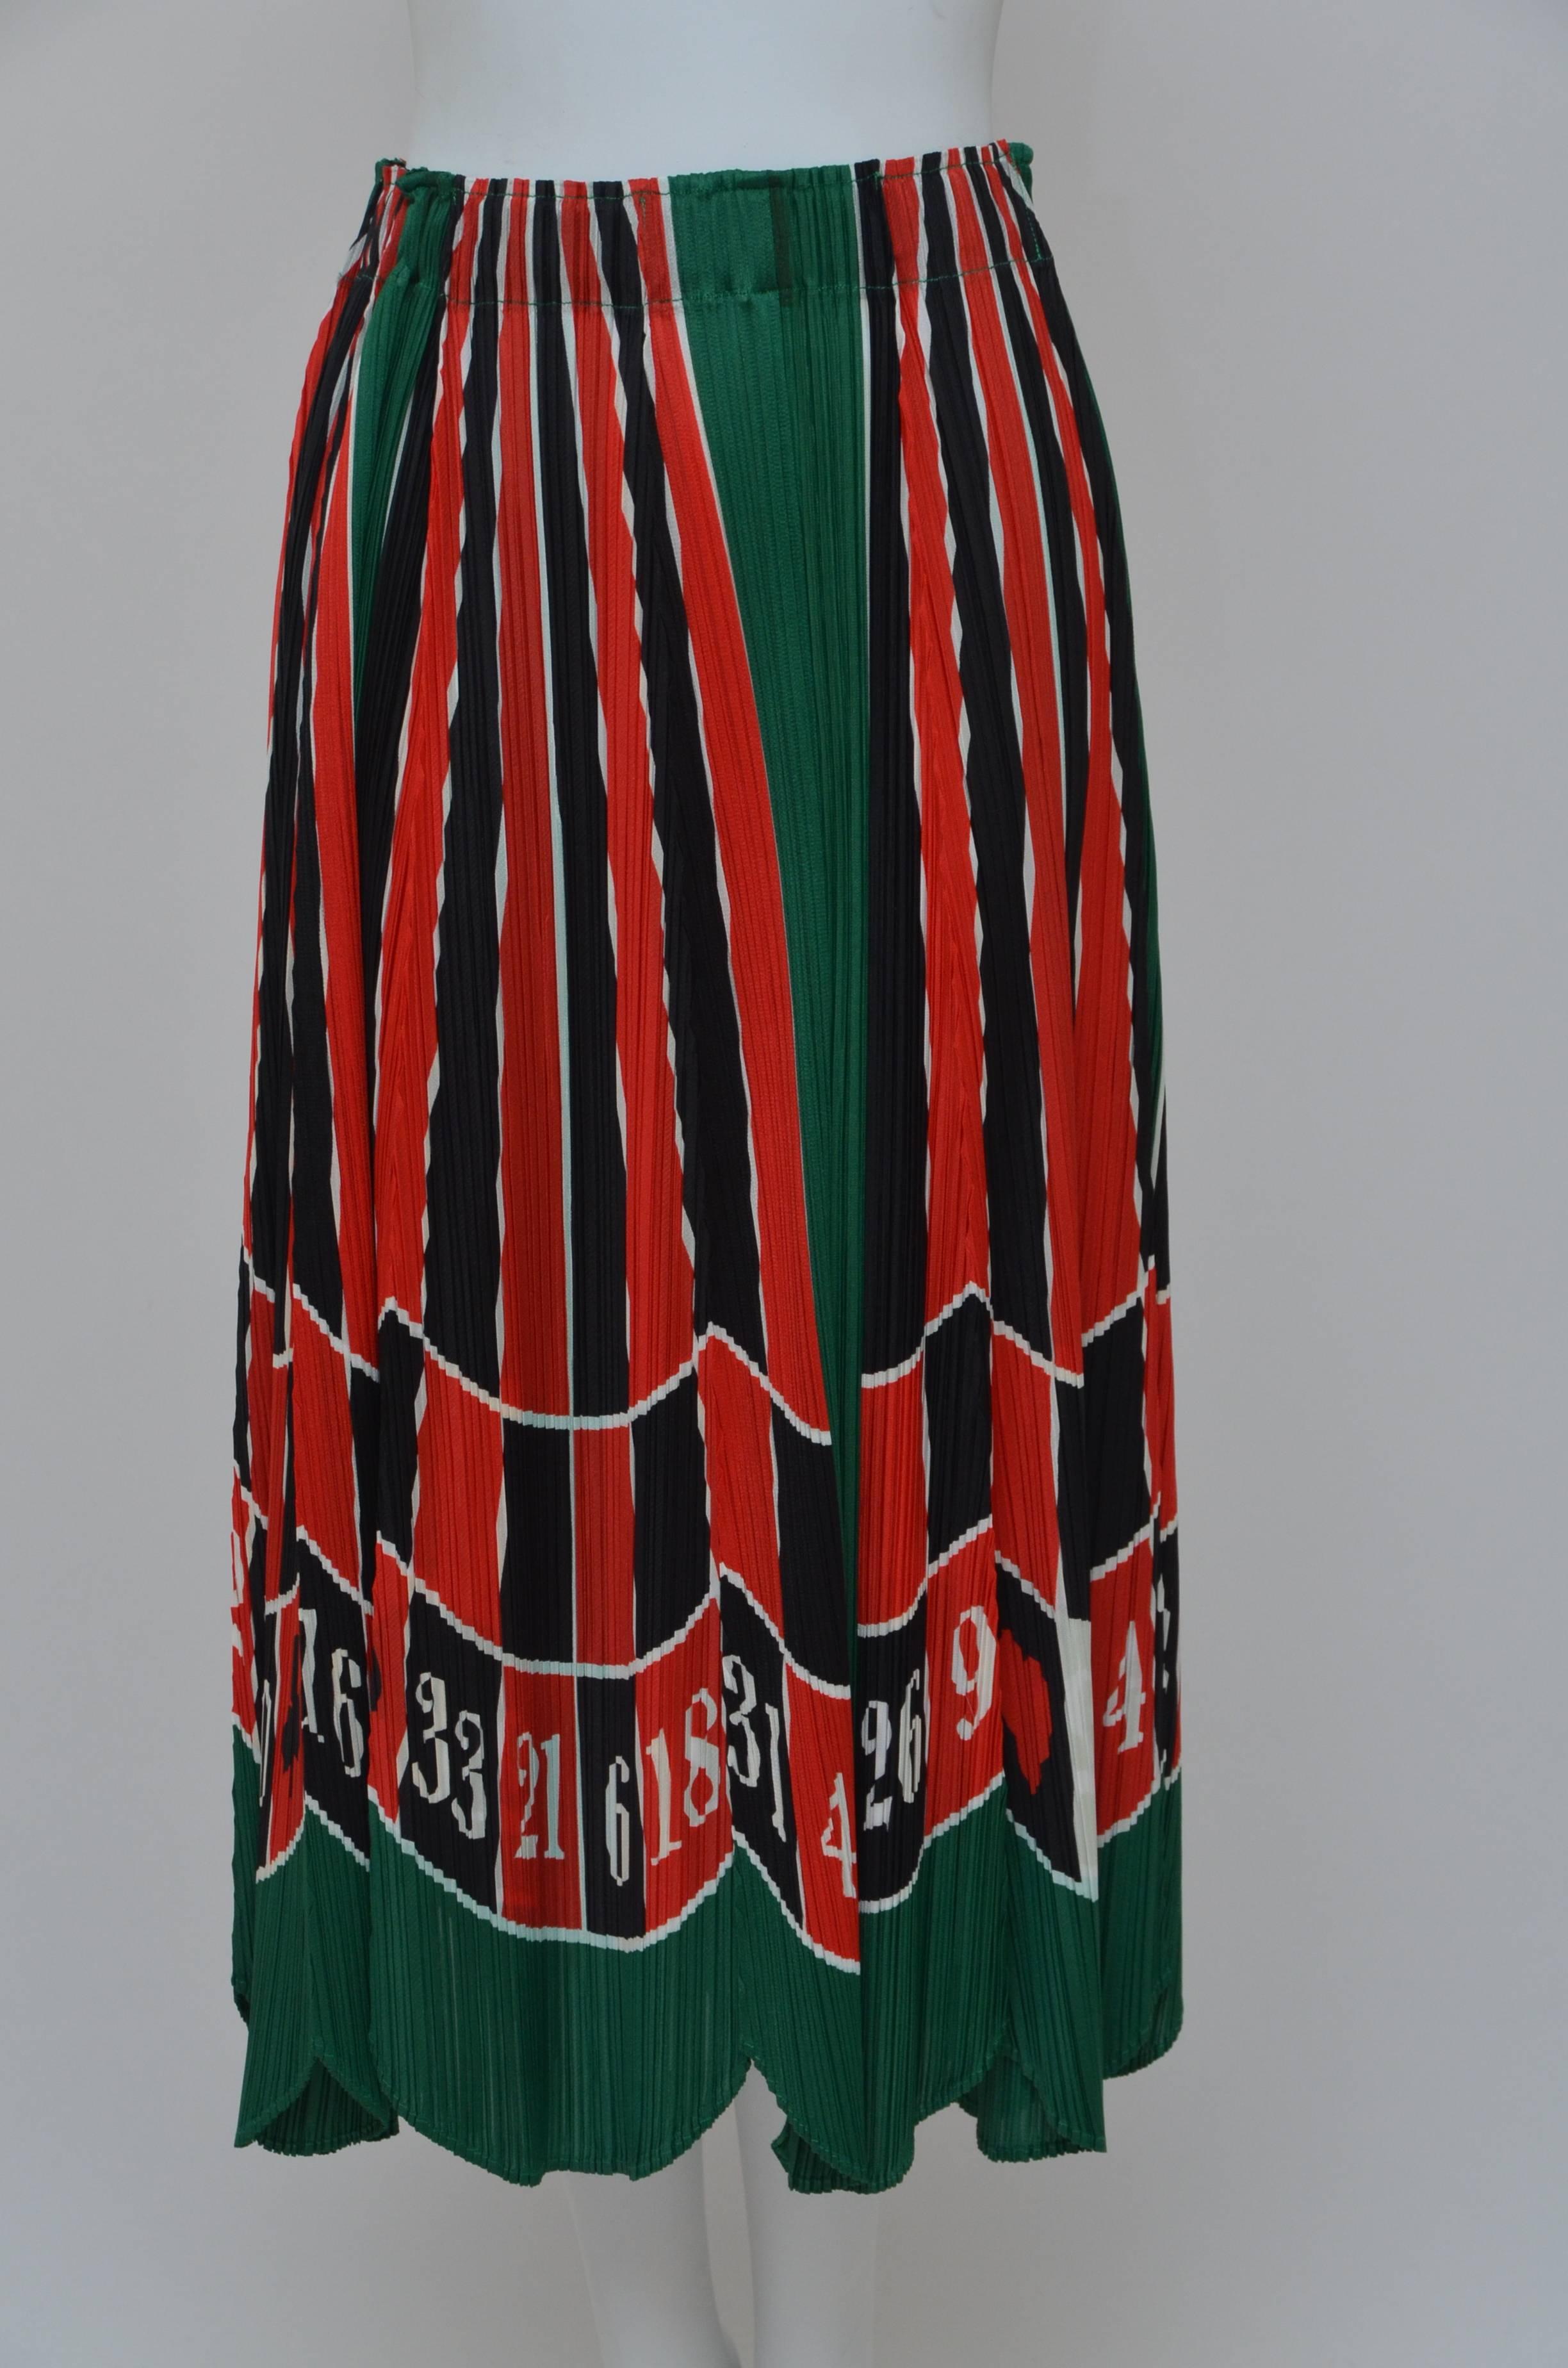 Issey Miyake Pleats Please roulette skirt
New with tags.
Waist is  elastic
Length 30.5